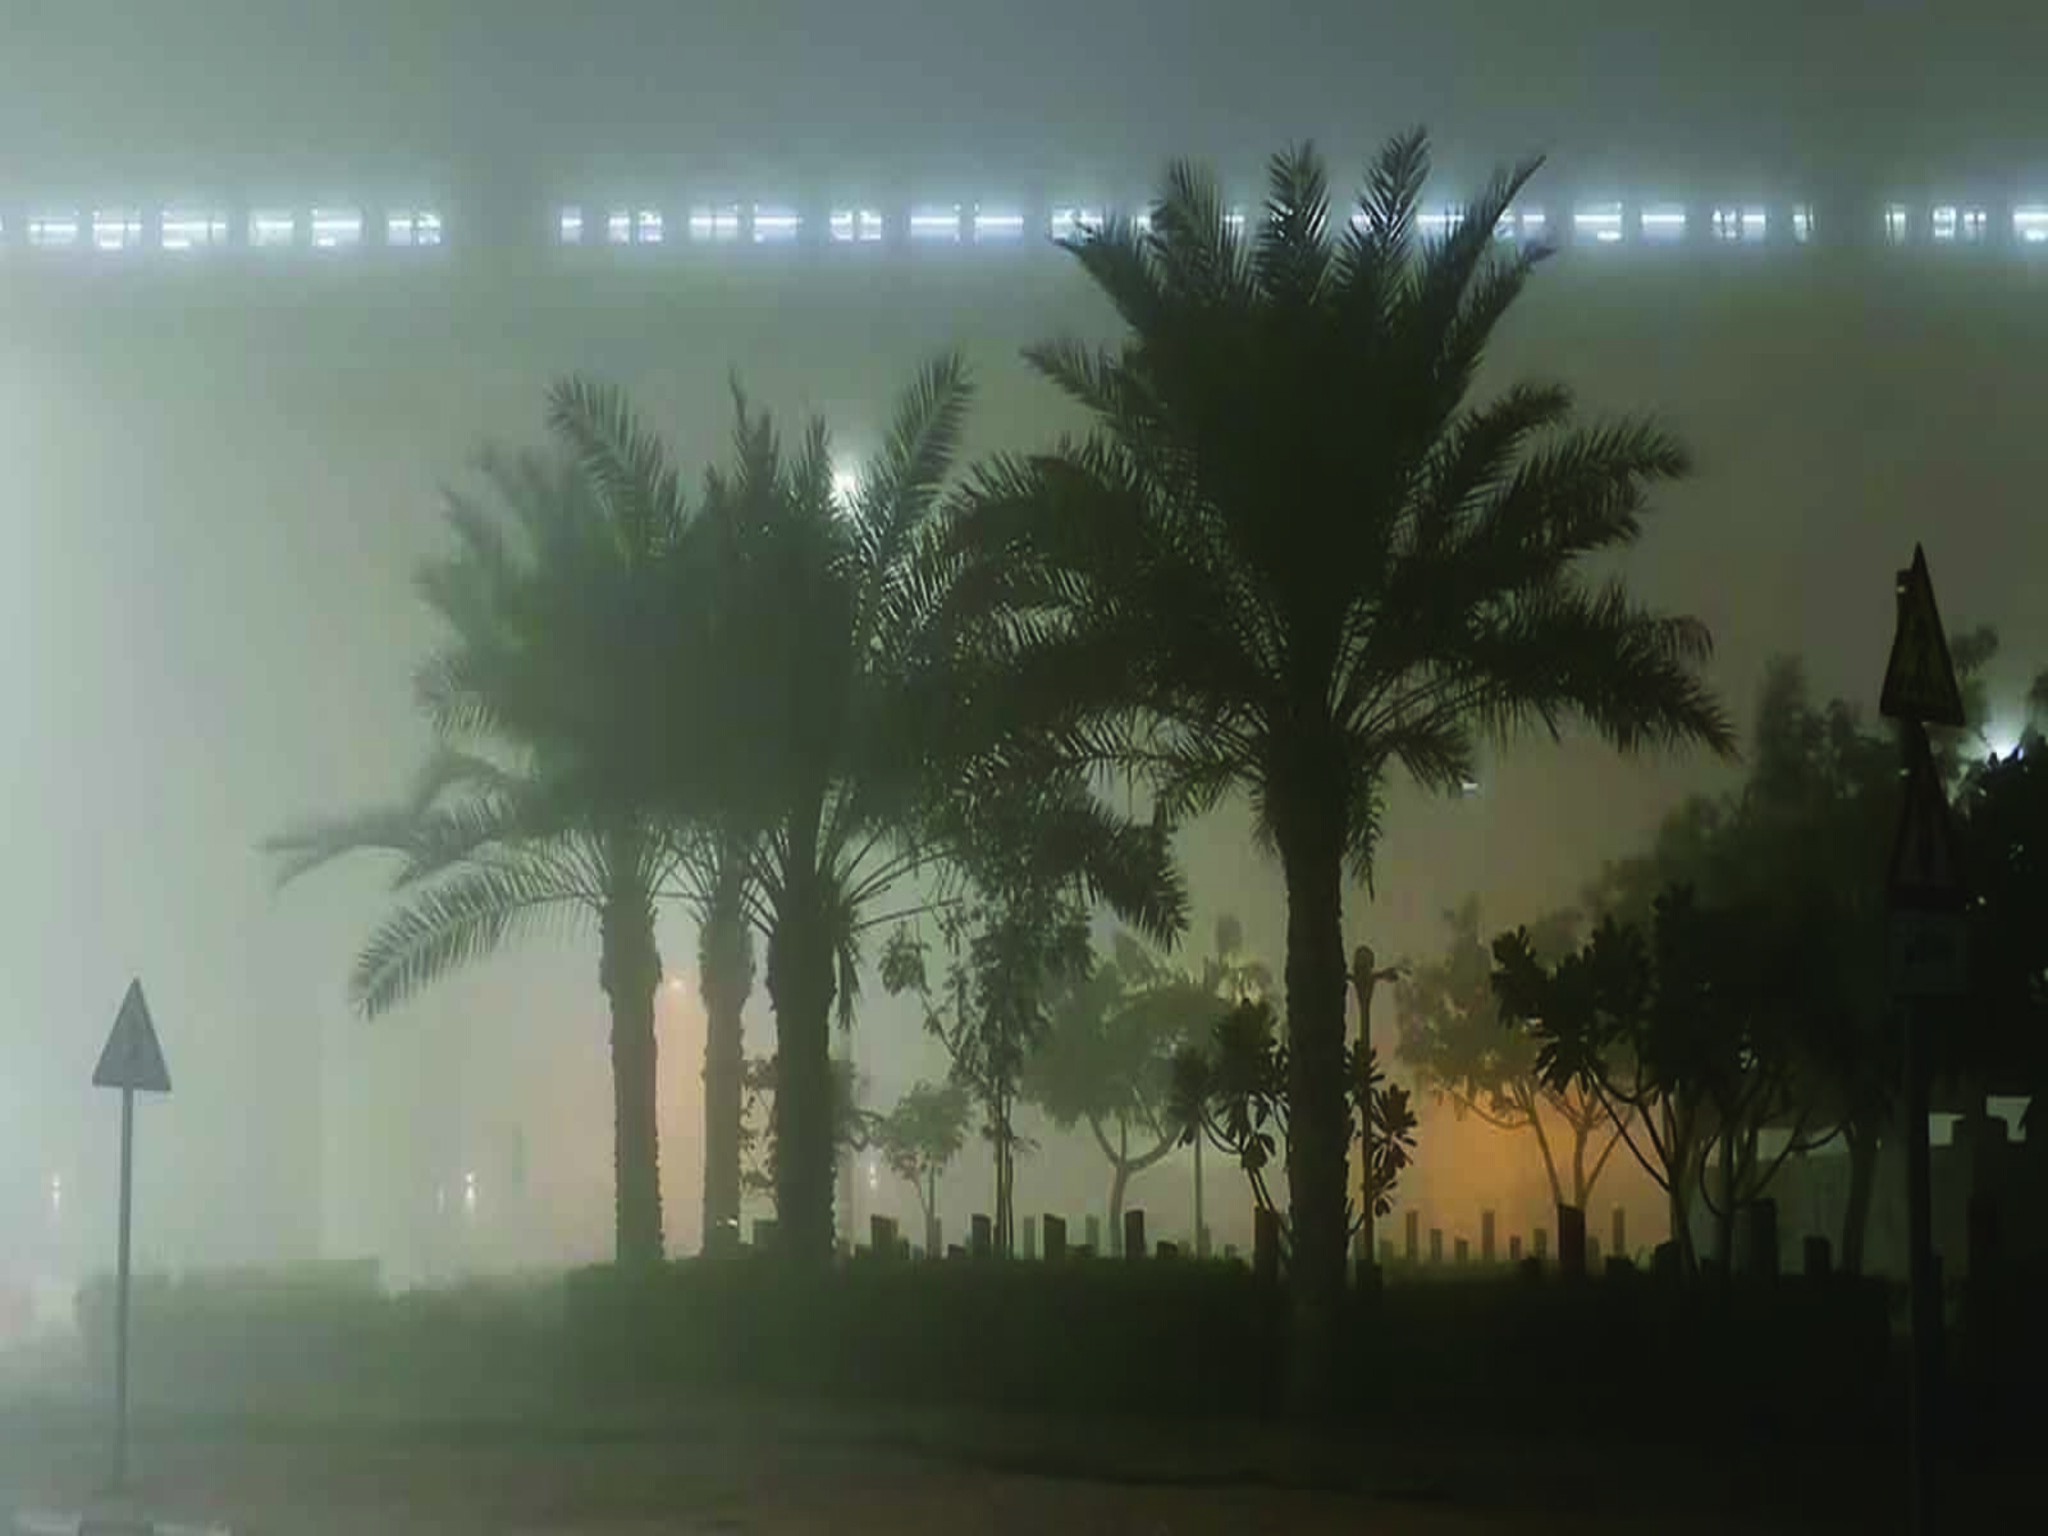 The UAE announces reduced speed limits on these major roads to 100 km/h due to fog